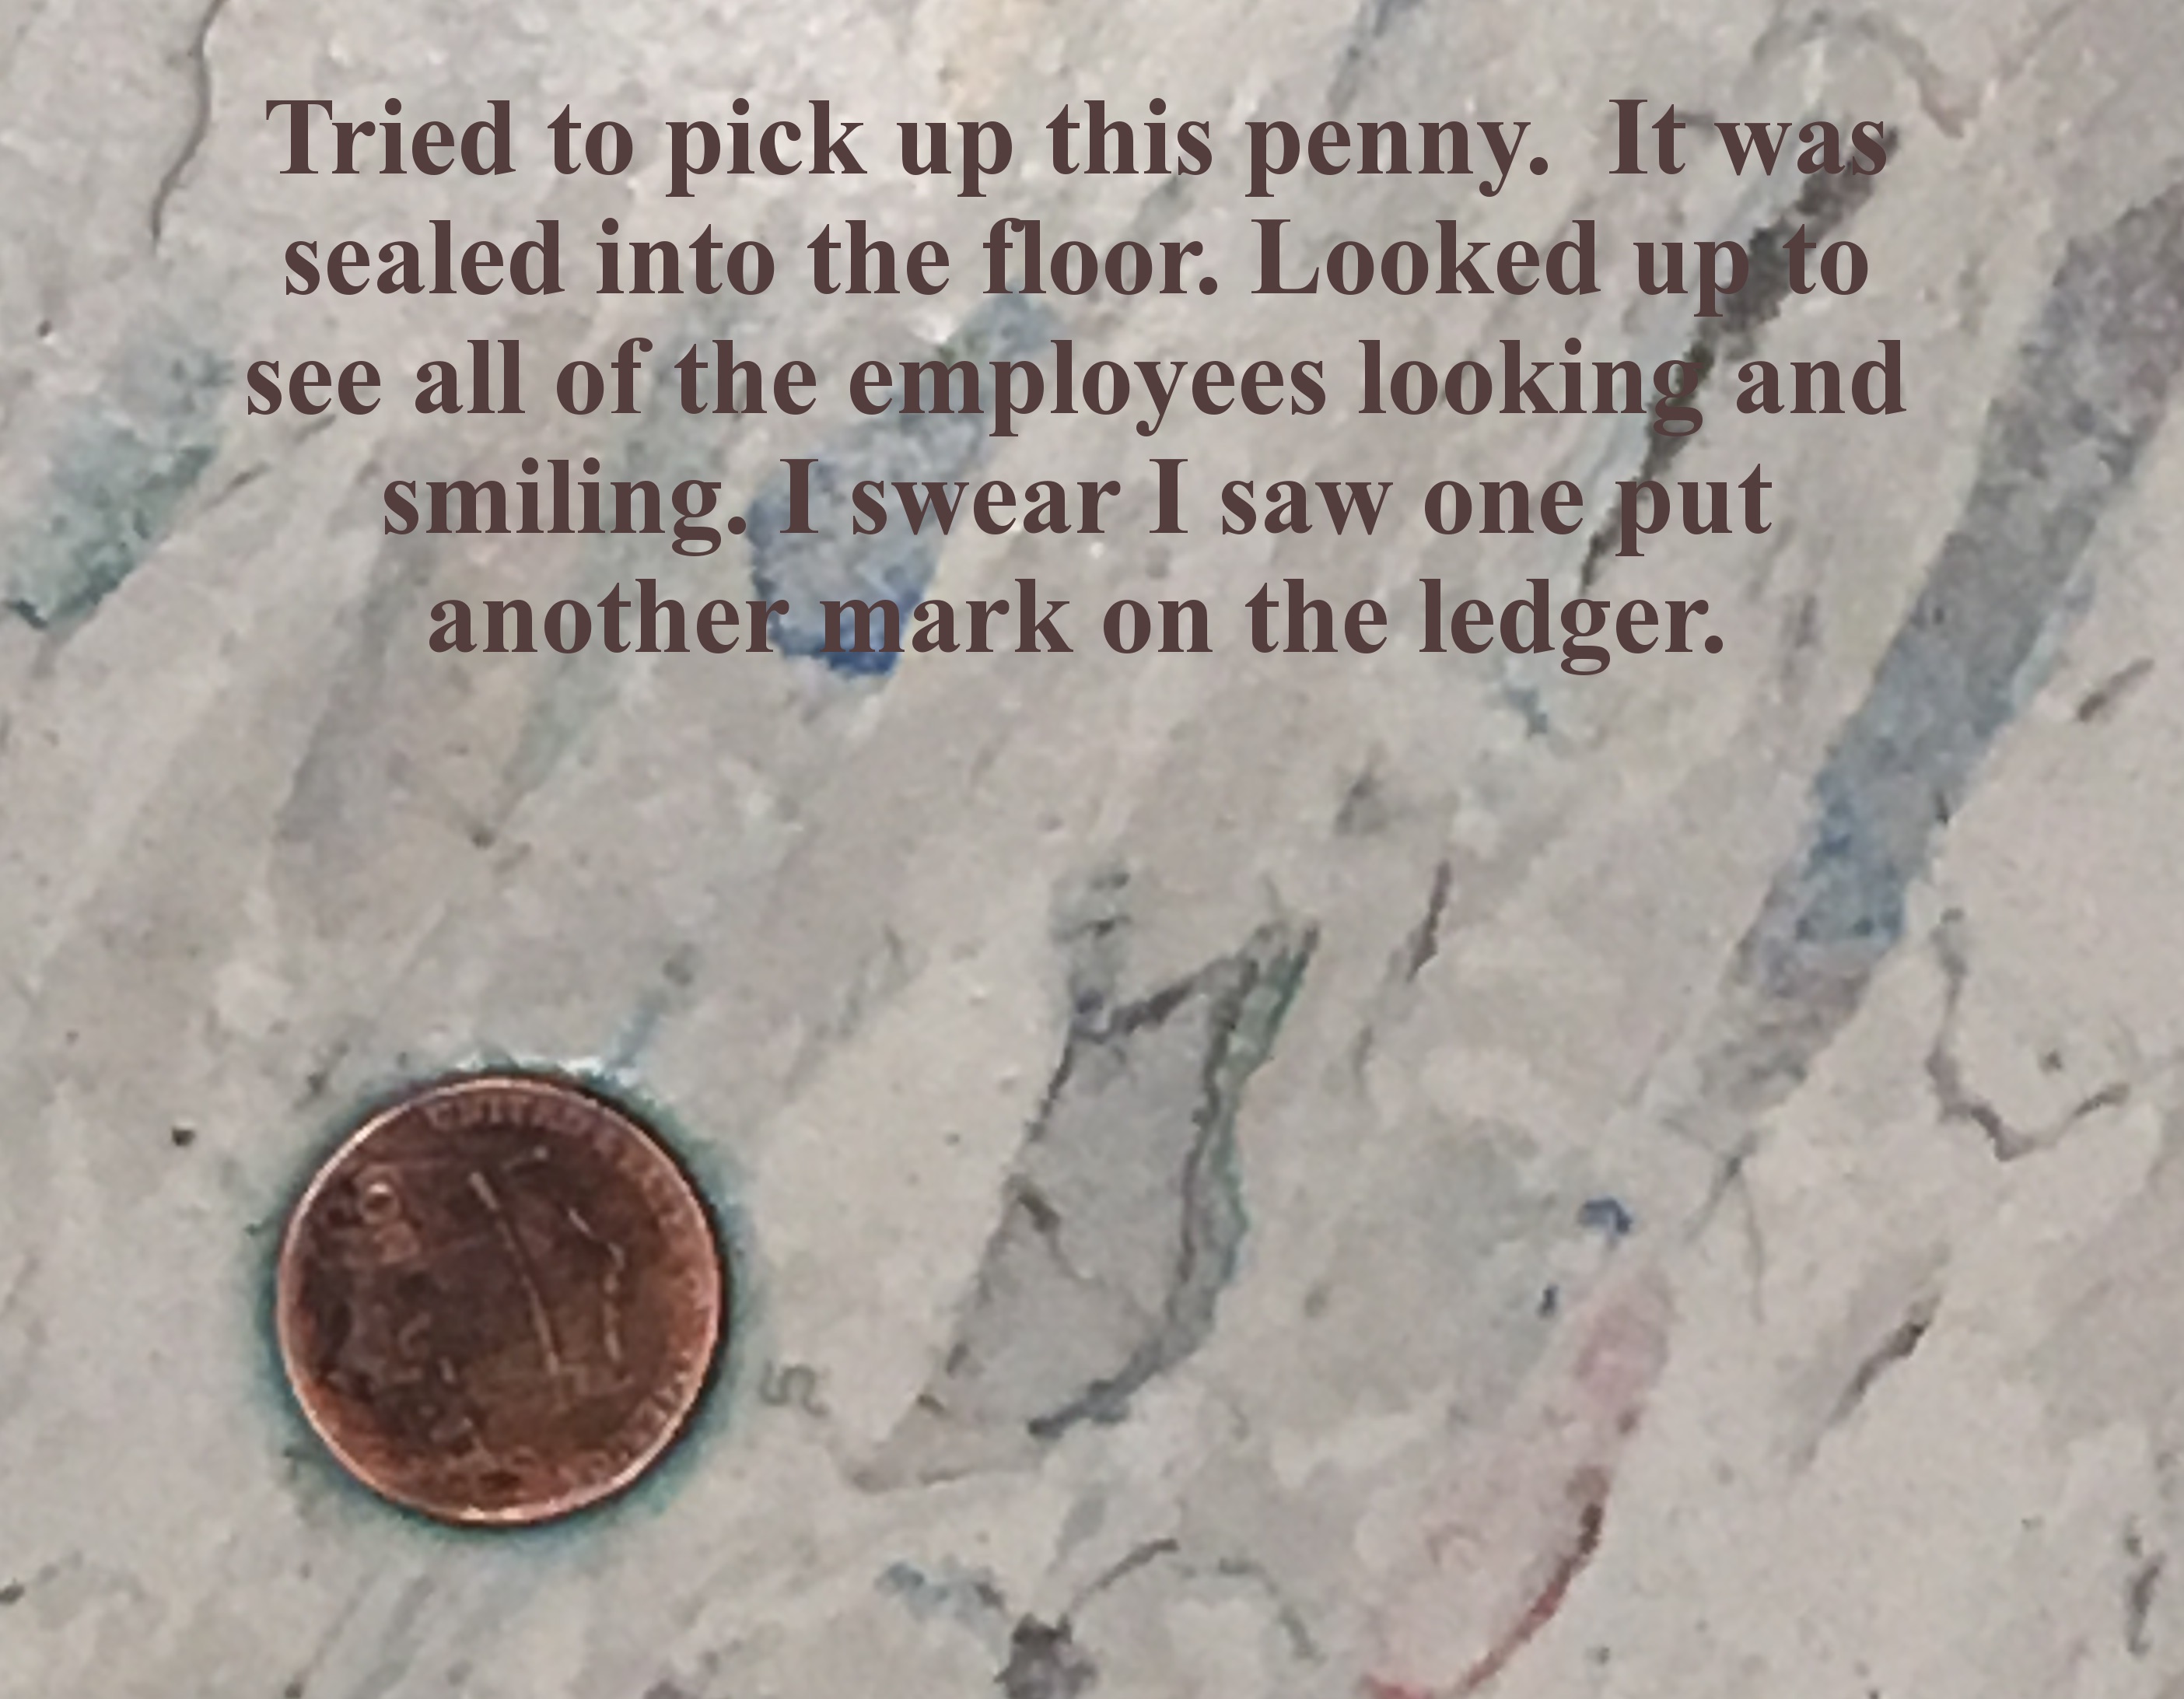 soil - Tried to pick up this penny. It was sealed into the floor. Looked up to see all of the employees looking and smiling. I swear I saw one put another mark on the ledger.